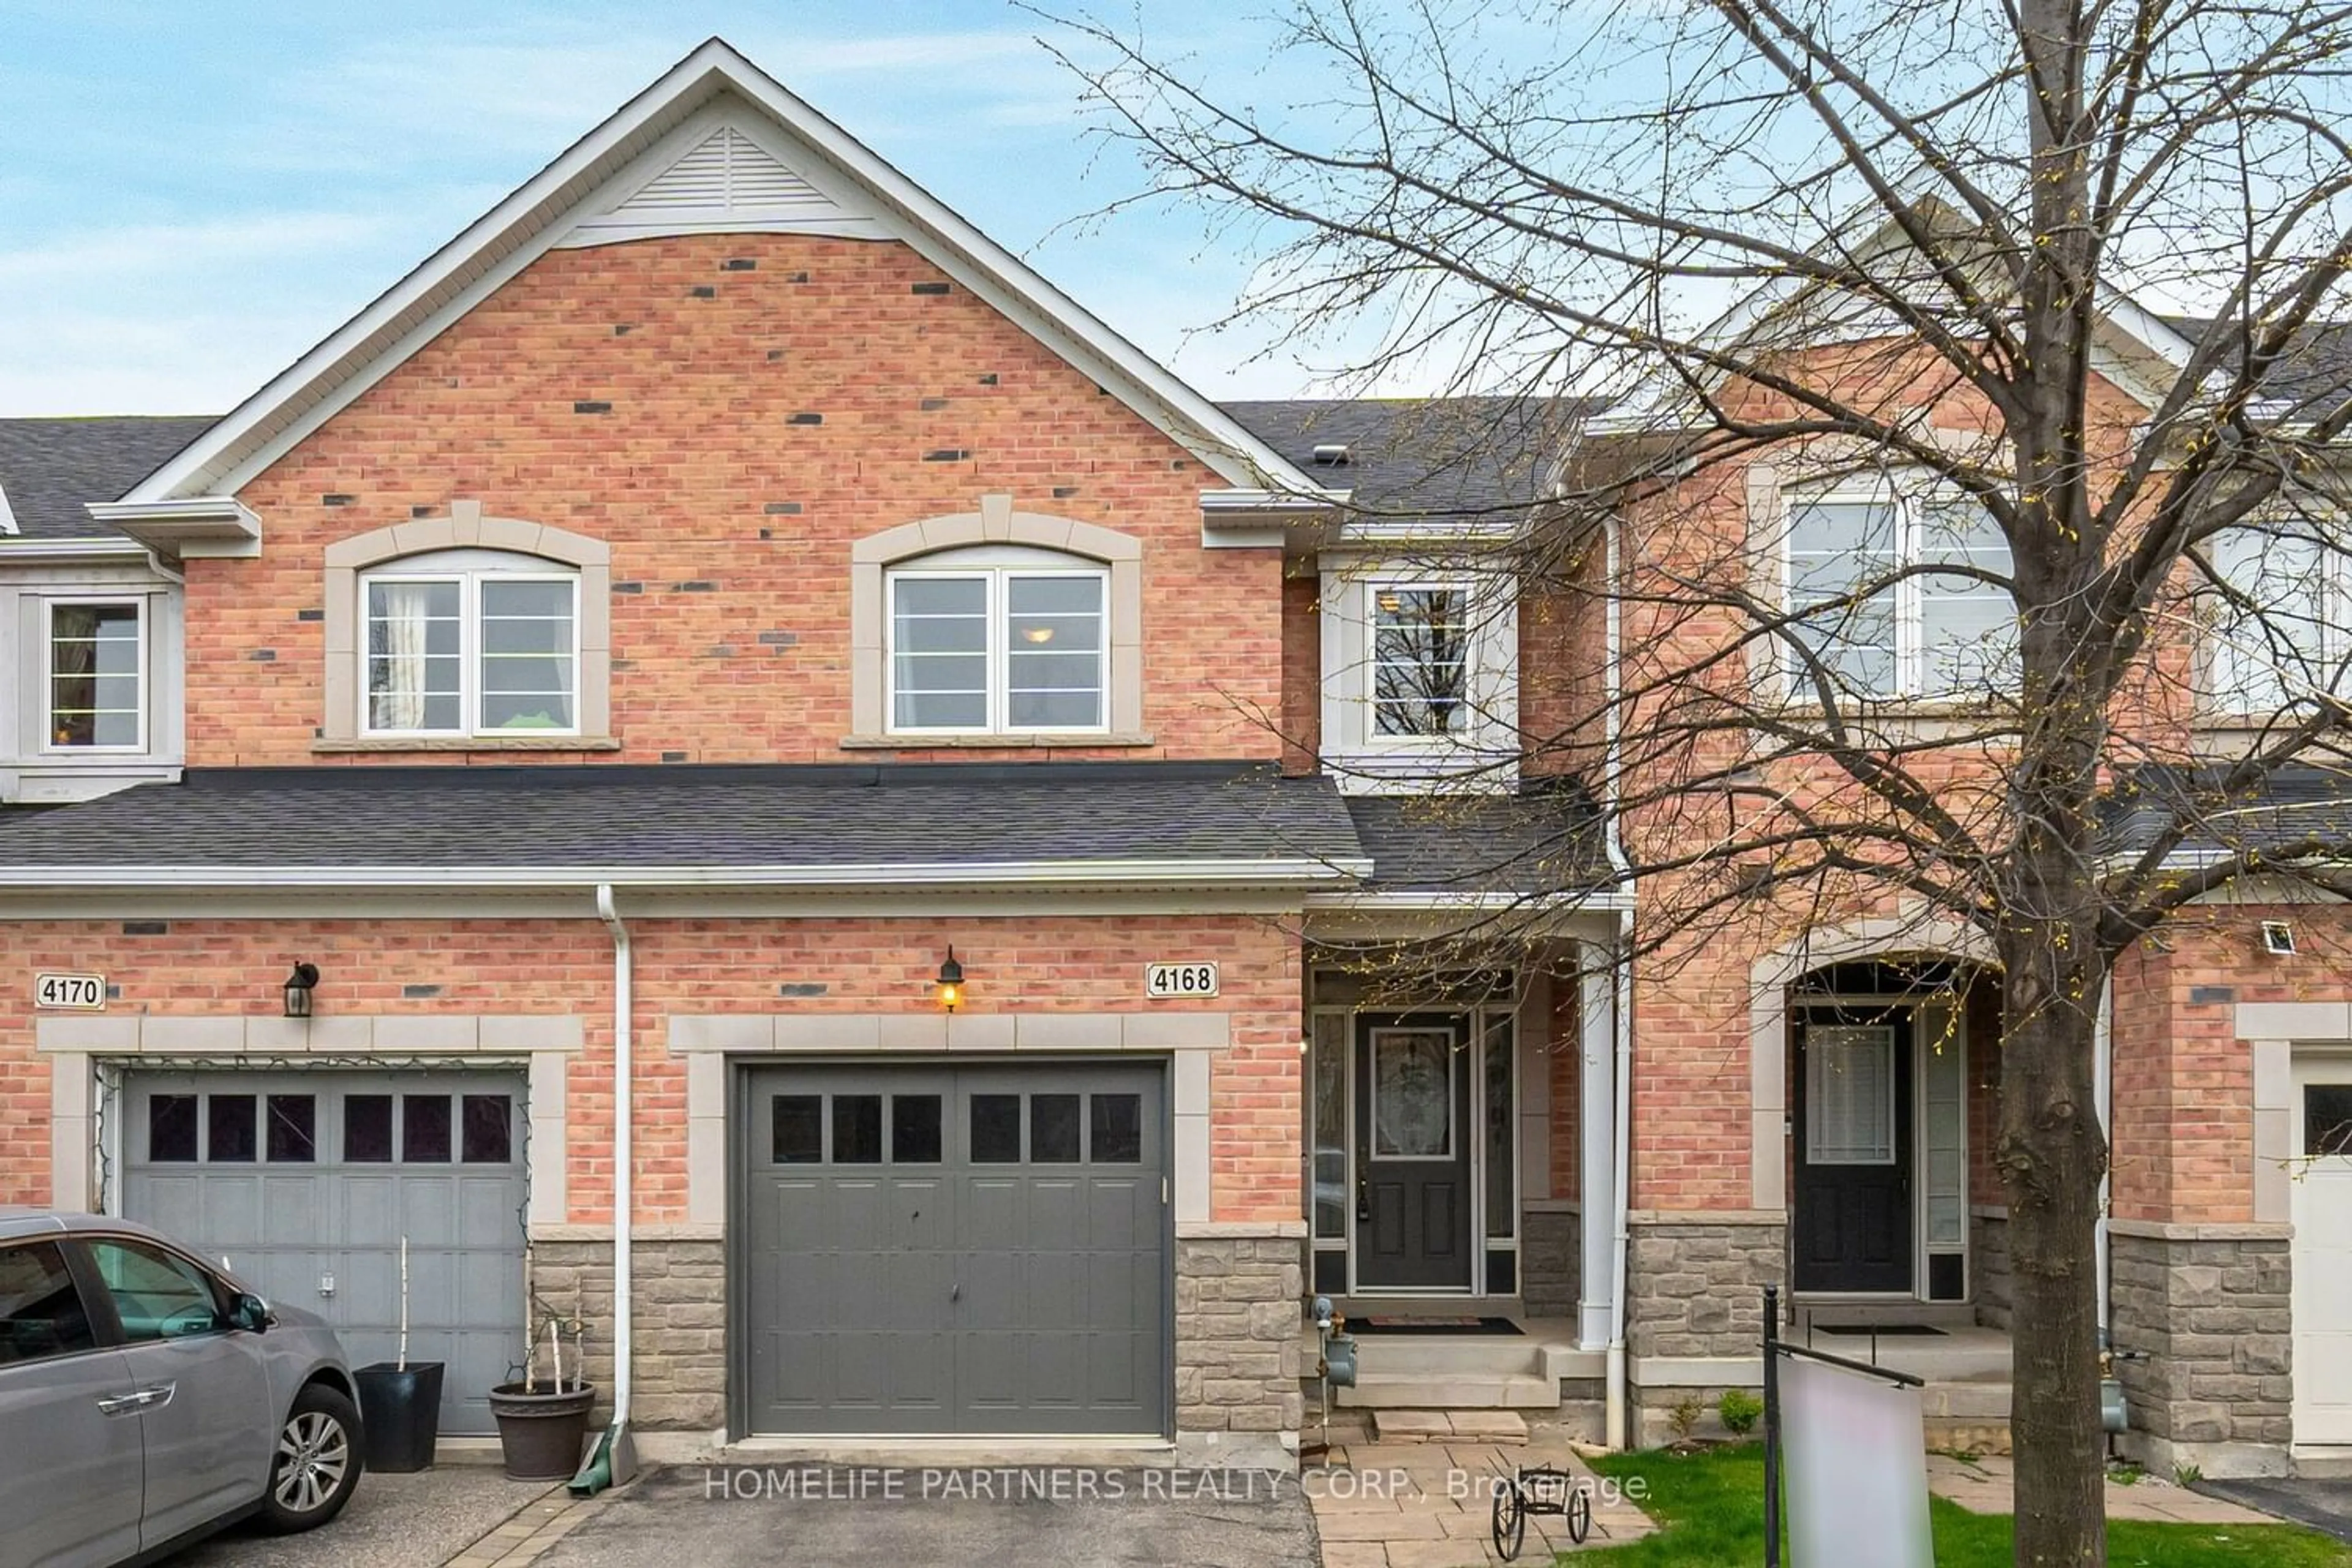 Home with brick exterior material for 4168 Judson Common, Burlington Ontario L7M 0G4